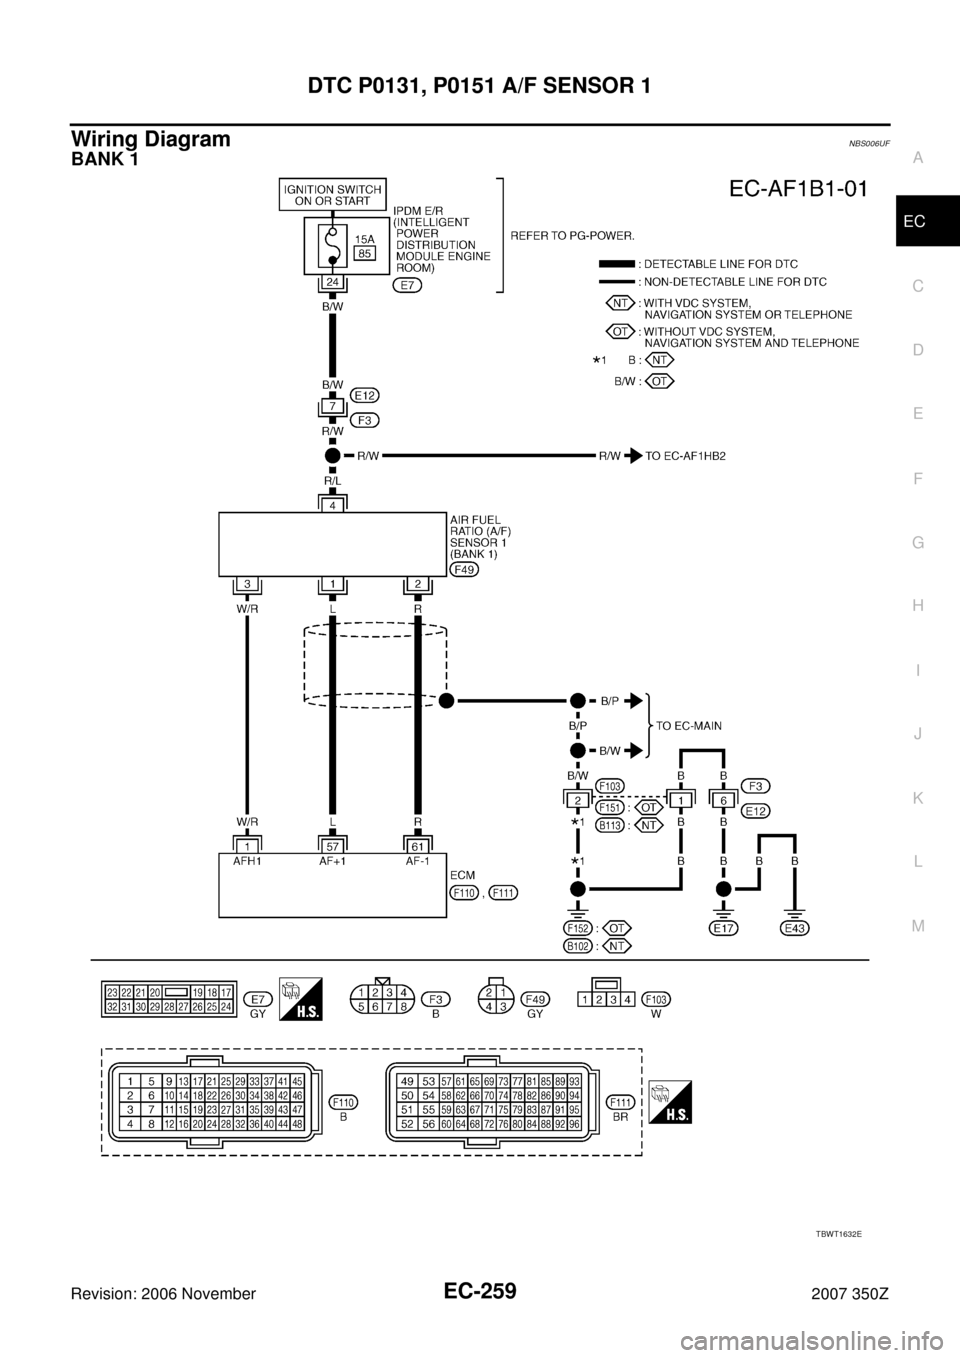 NISSAN 350Z 2007 Z33 Engine Control Owners Guide DTC P0131, P0151 A/F SENSOR 1
EC-259
C
D
E
F
G
H
I
J
K
L
MA
EC
Revision: 2006 November2007 350Z
Wiring DiagramNBS006UF
BANK 1
TBWT1632E 